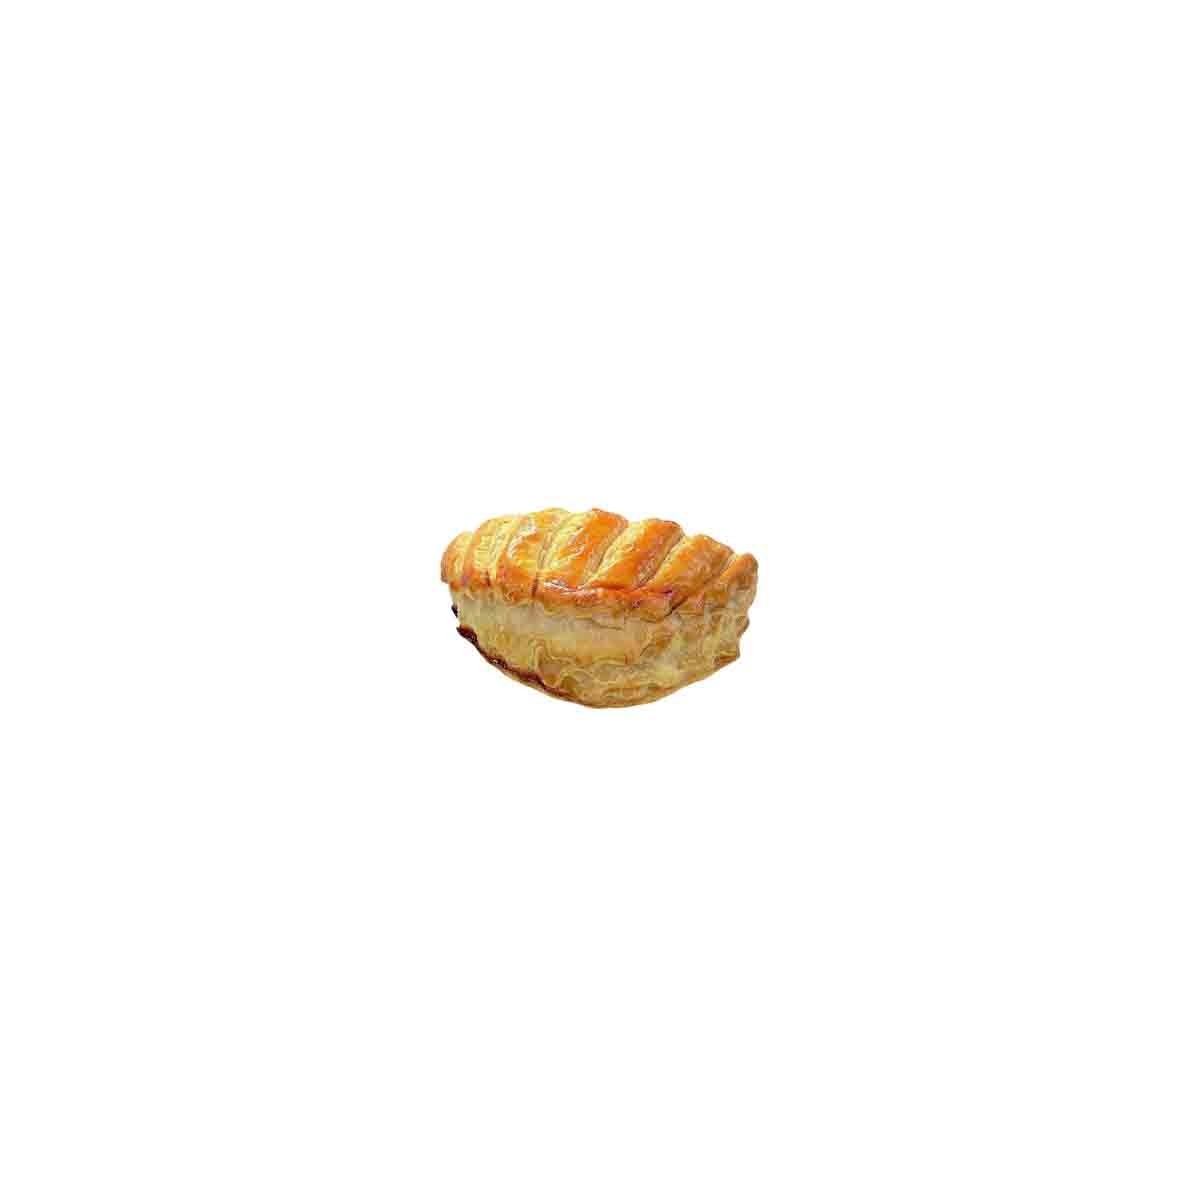 VAMIX F22 APPLE TURNOVER BUTTER  READY TO BAKE 40X120GR  BOX